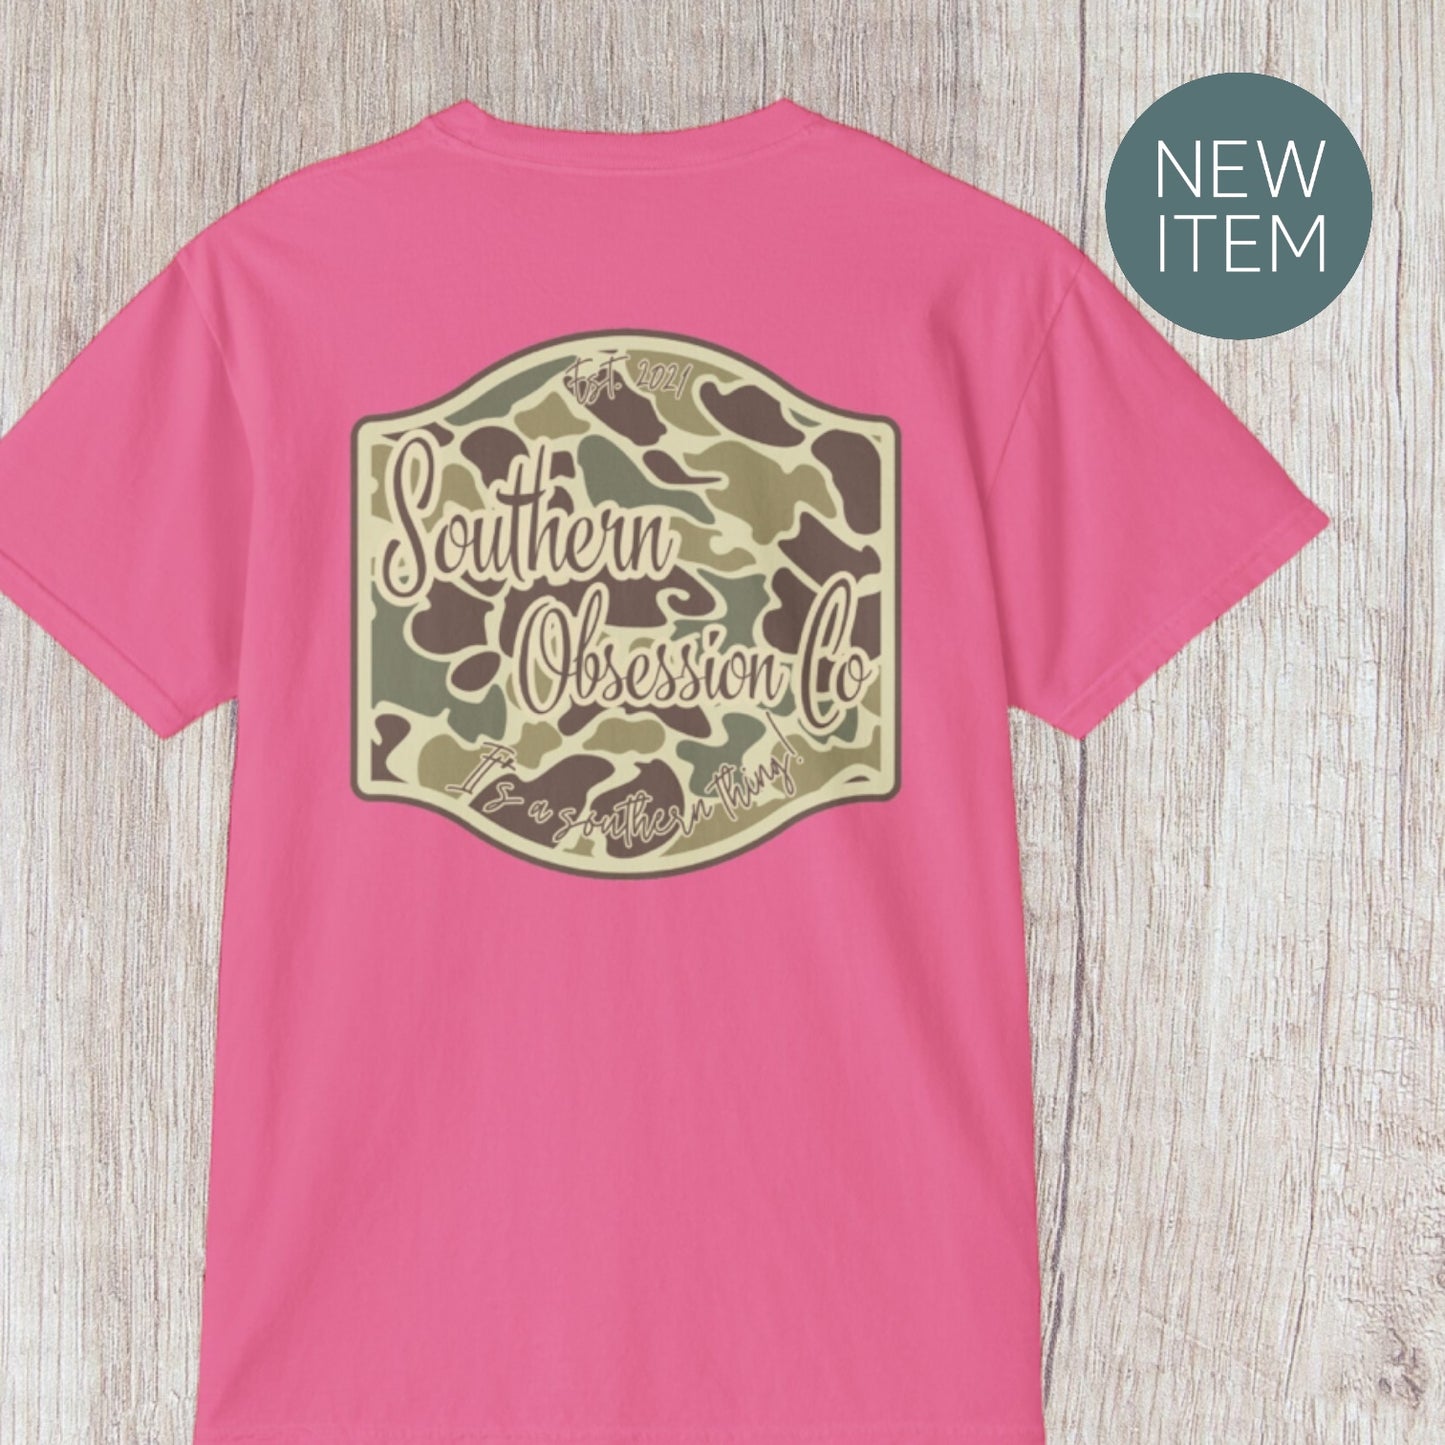 SOC Camo Graphic Tee - Southern Obsession Co. 